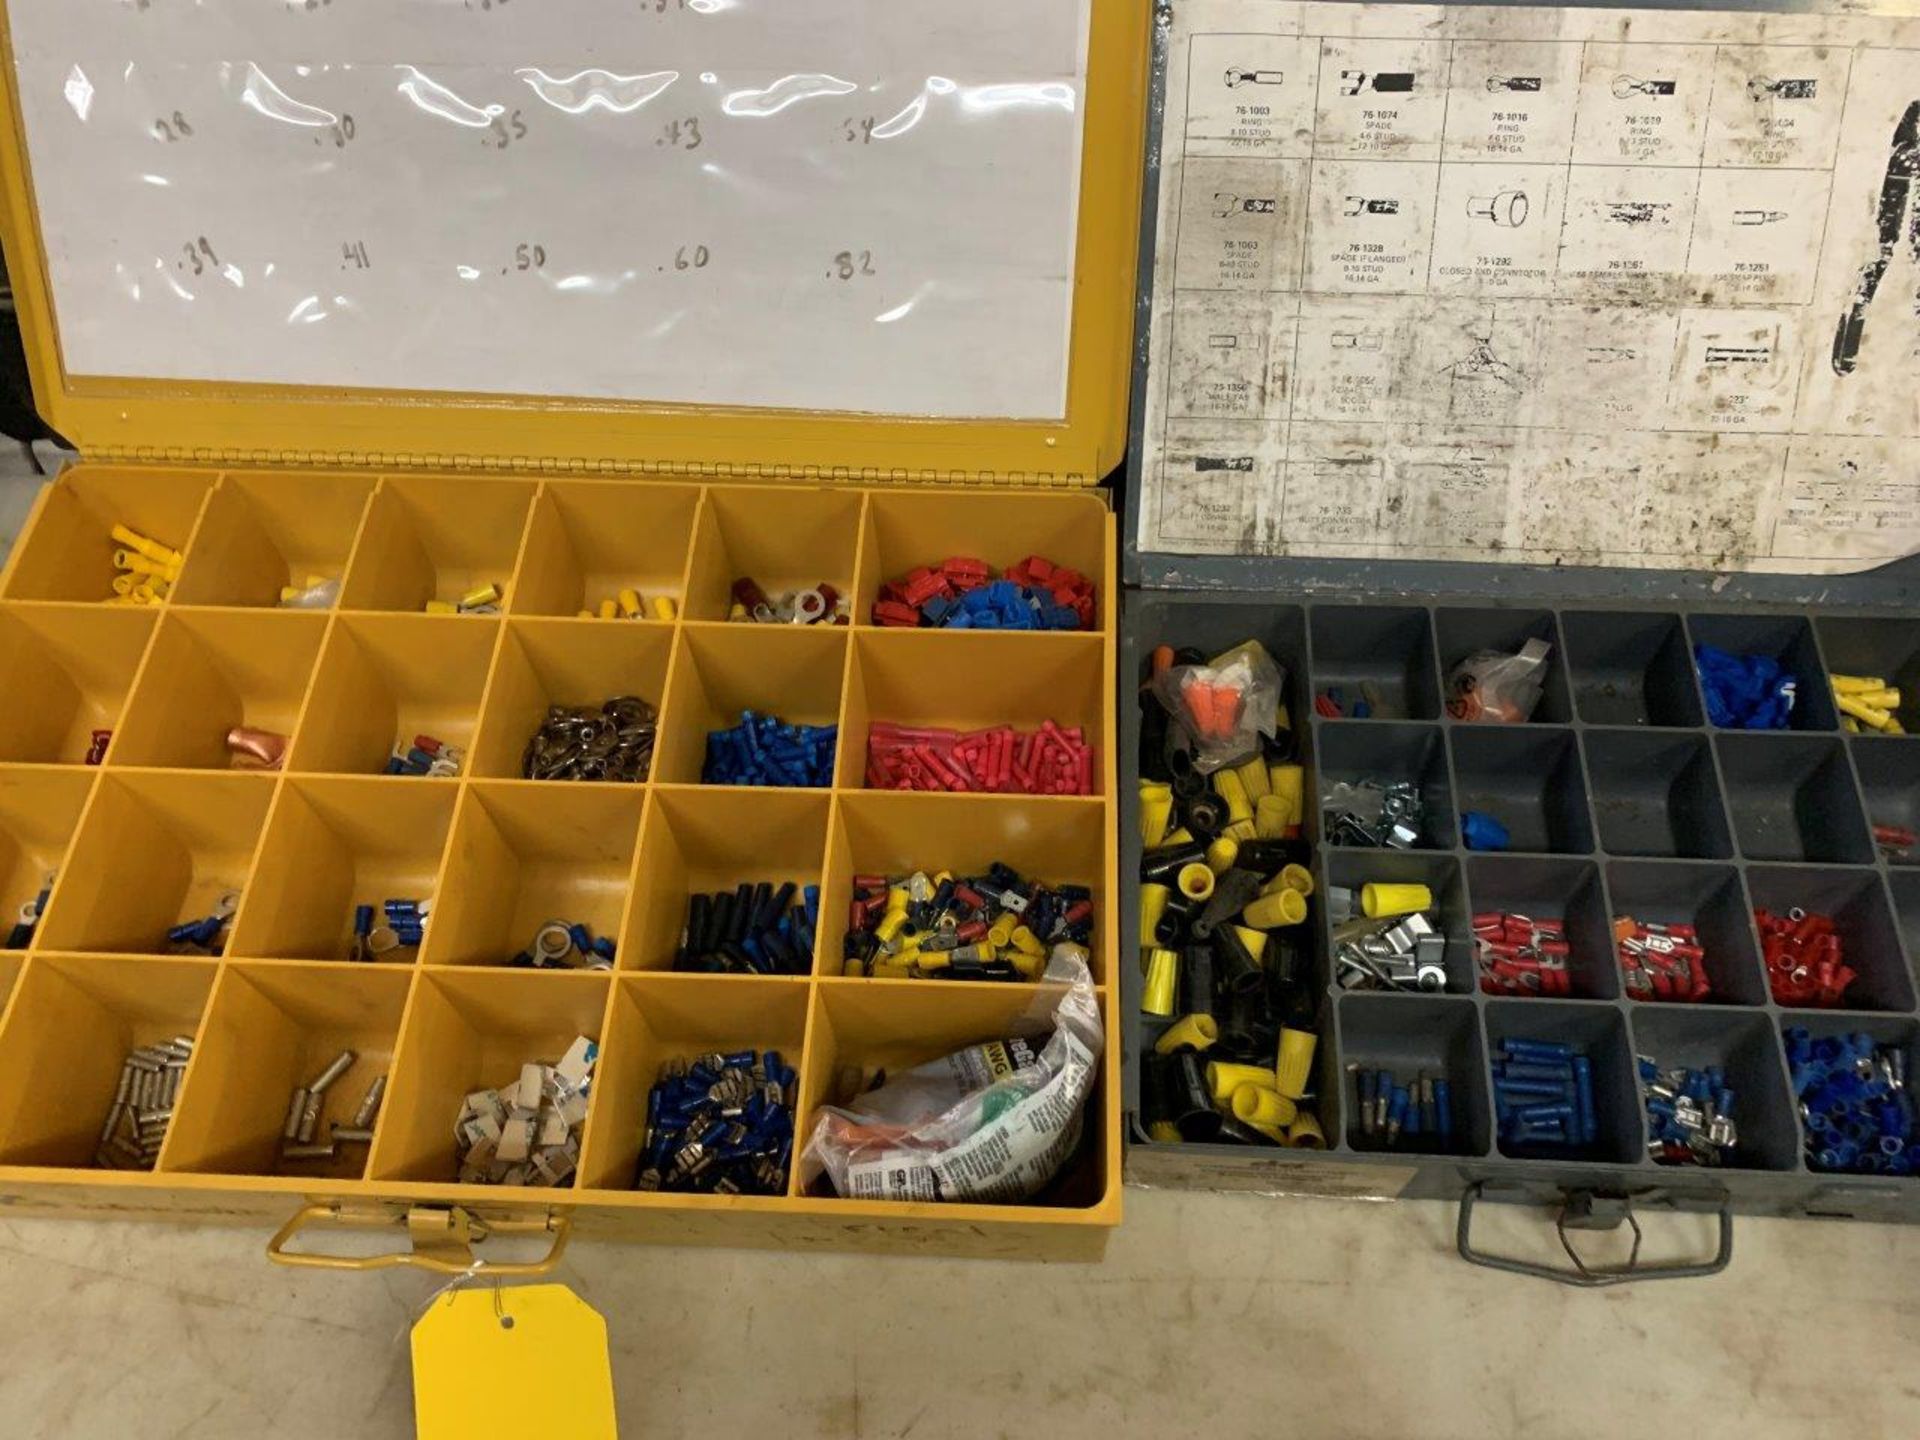 L/O HARDWARE ASSORTMENT TRAYS W/ AUTOMOTIVE ELEC. CONNECTORS AND ASSORTED HARDWARE - Image 2 of 7